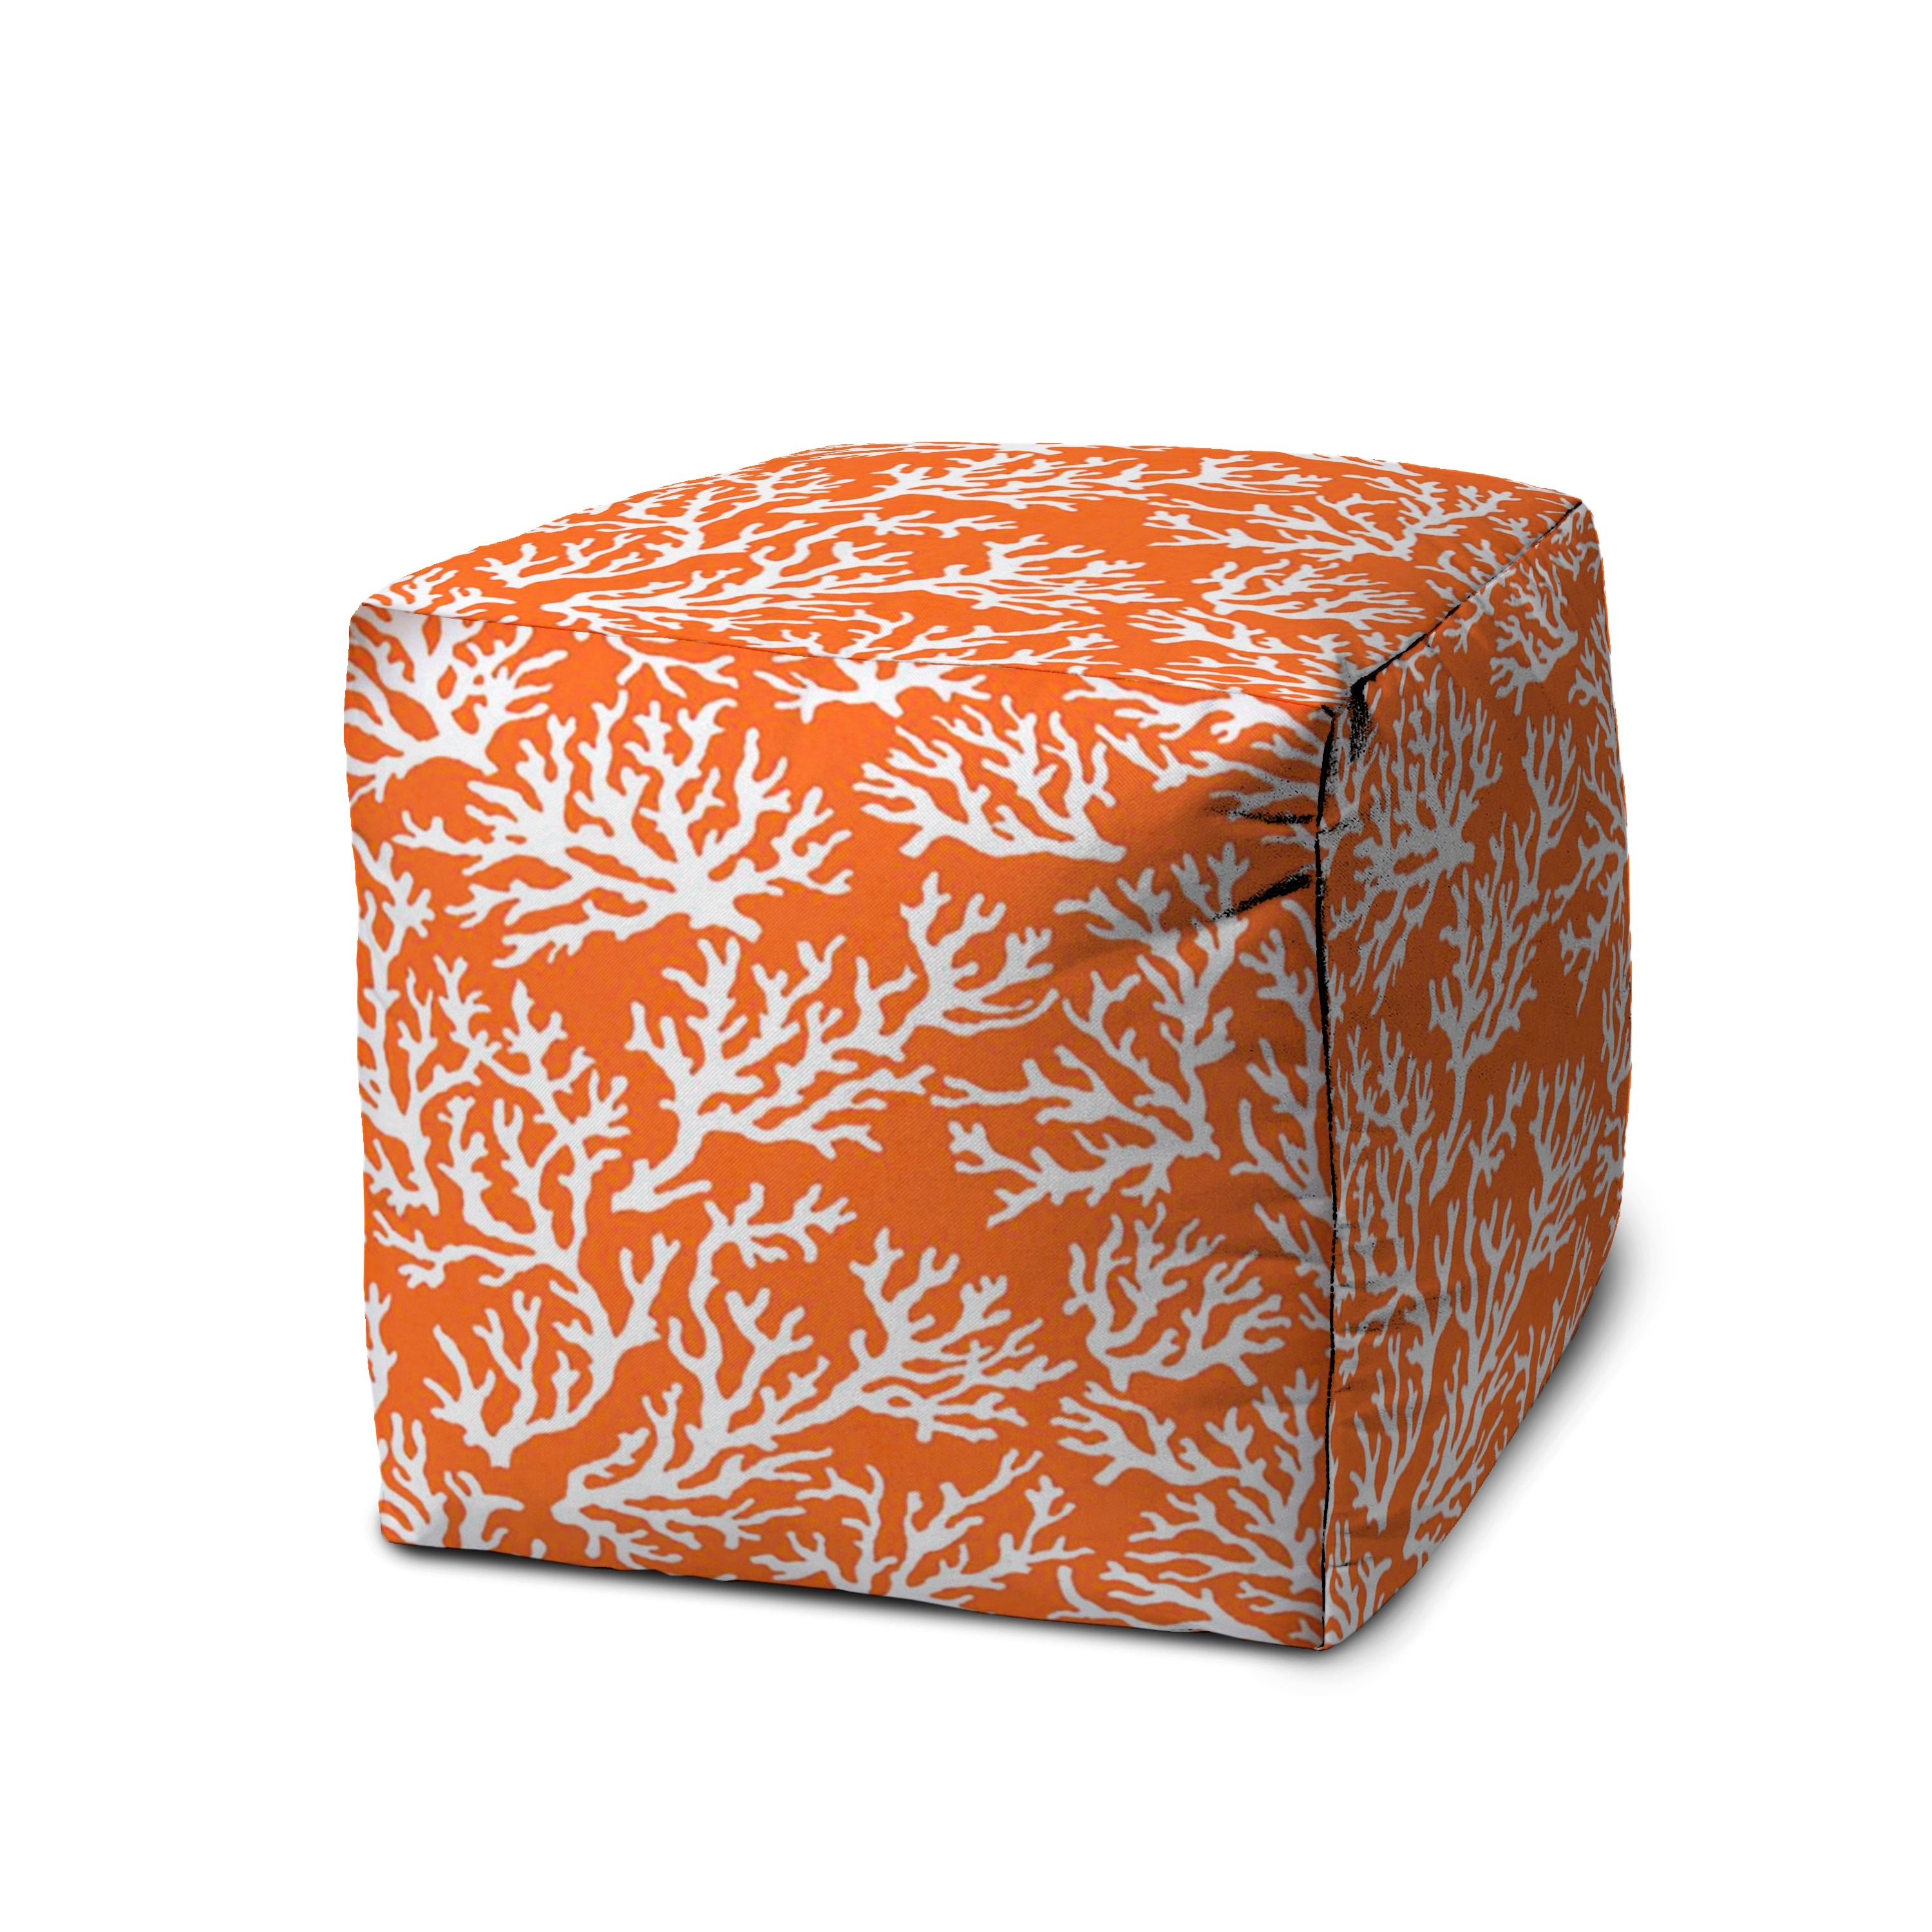 Joita Indoor Outdoor Pouf CORAL REEF Zipper Cover with Luxury Polyfil  Stuffing 17 x 17 x 17 - Bed Bath & Beyond - 35631522